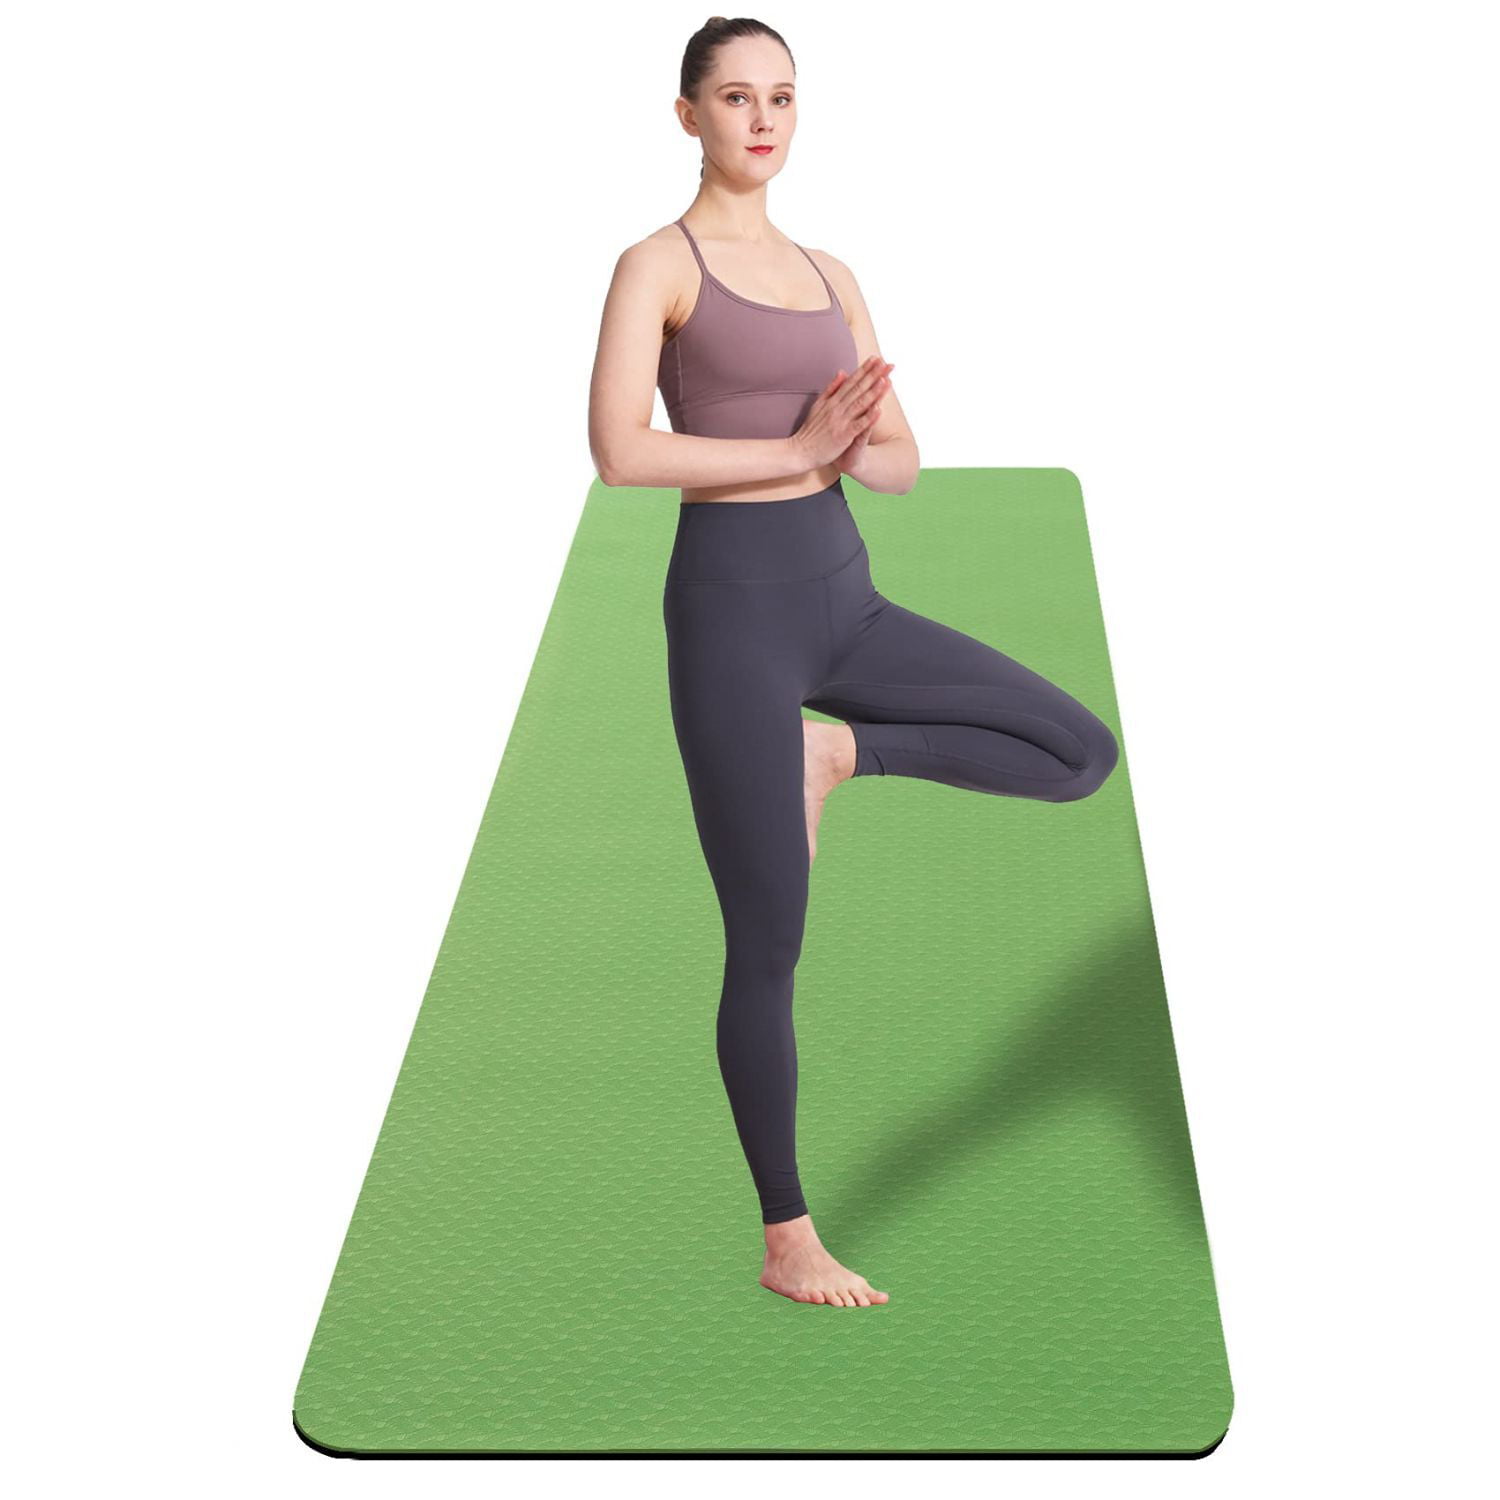 Yoga Mat Gym Exercise 6mm Thick Large Comfortable NonSlip TPE EcoFriendly Pilate 